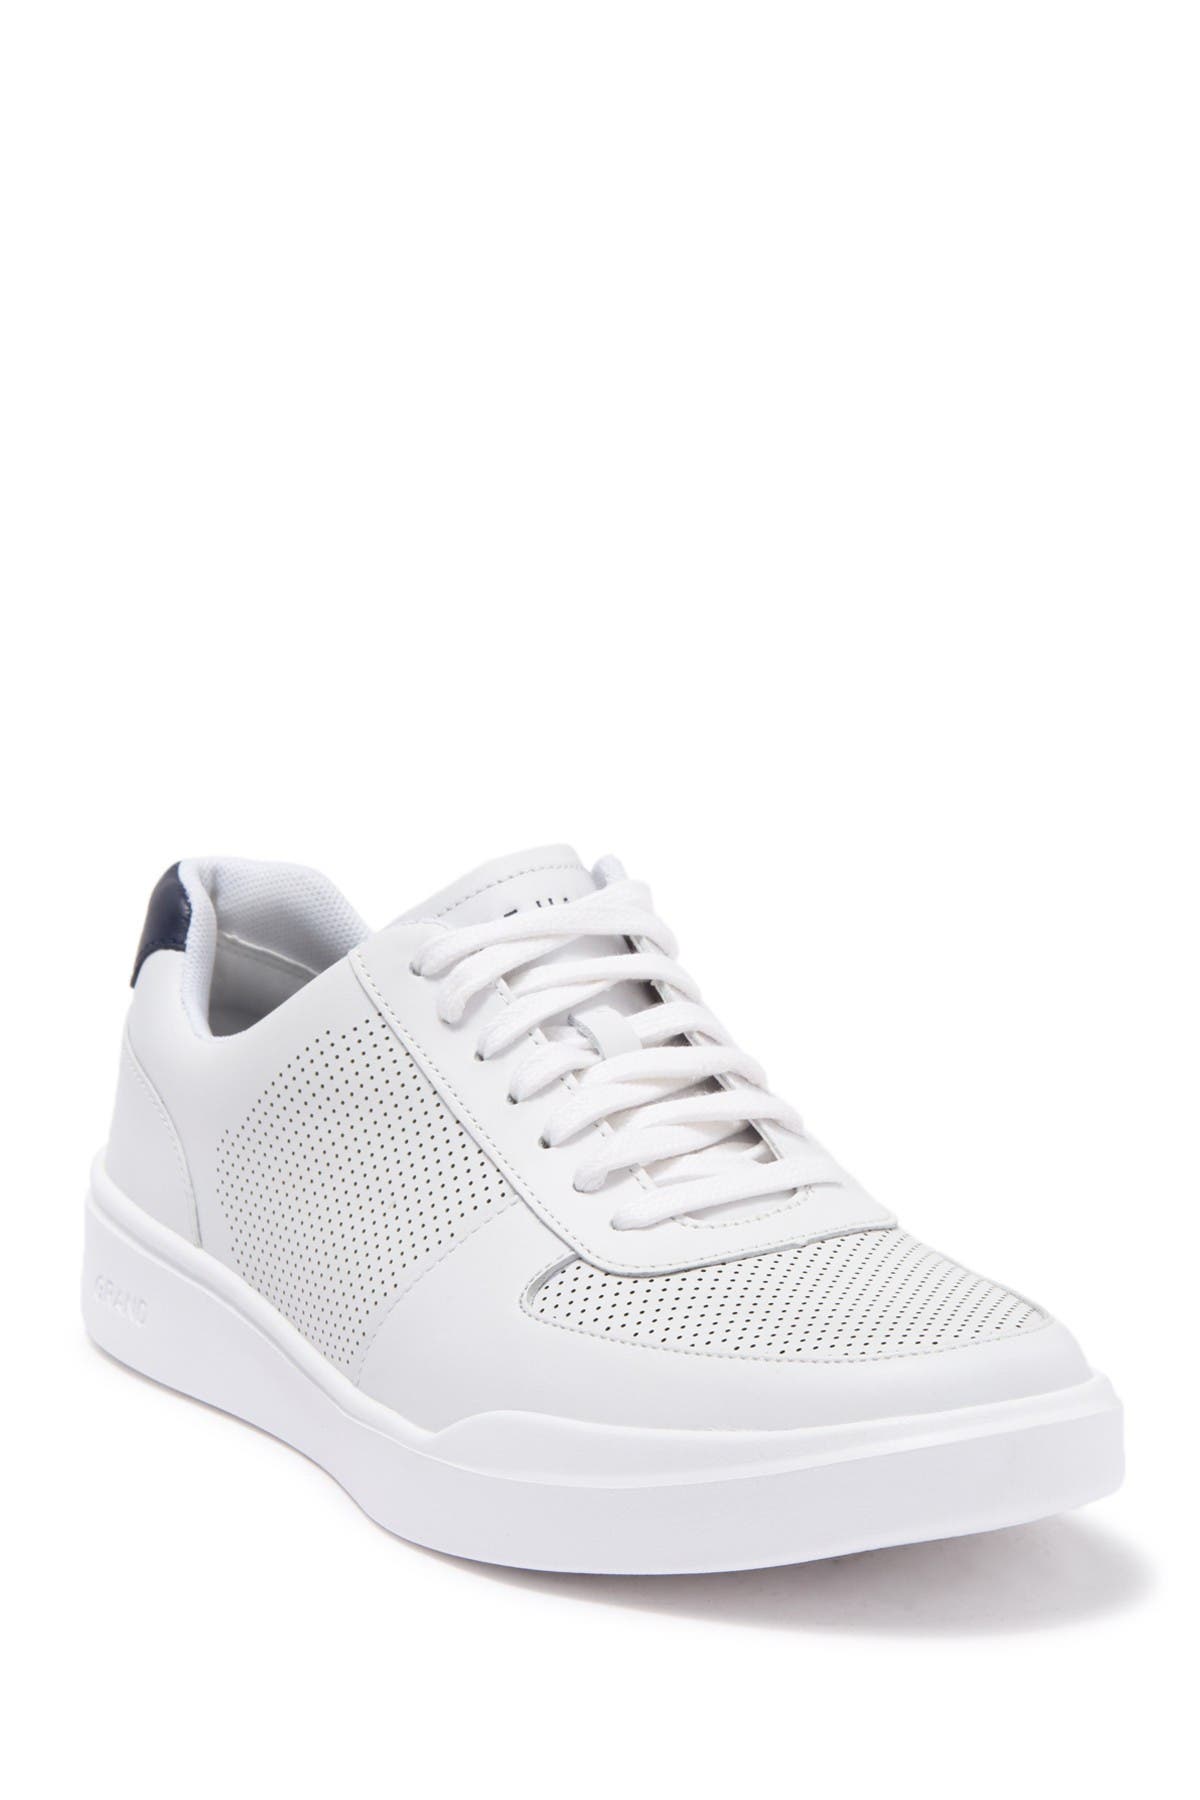 Cole Haan Grand Crosscourt Modern Perforated Sneaker In Optic Wht/